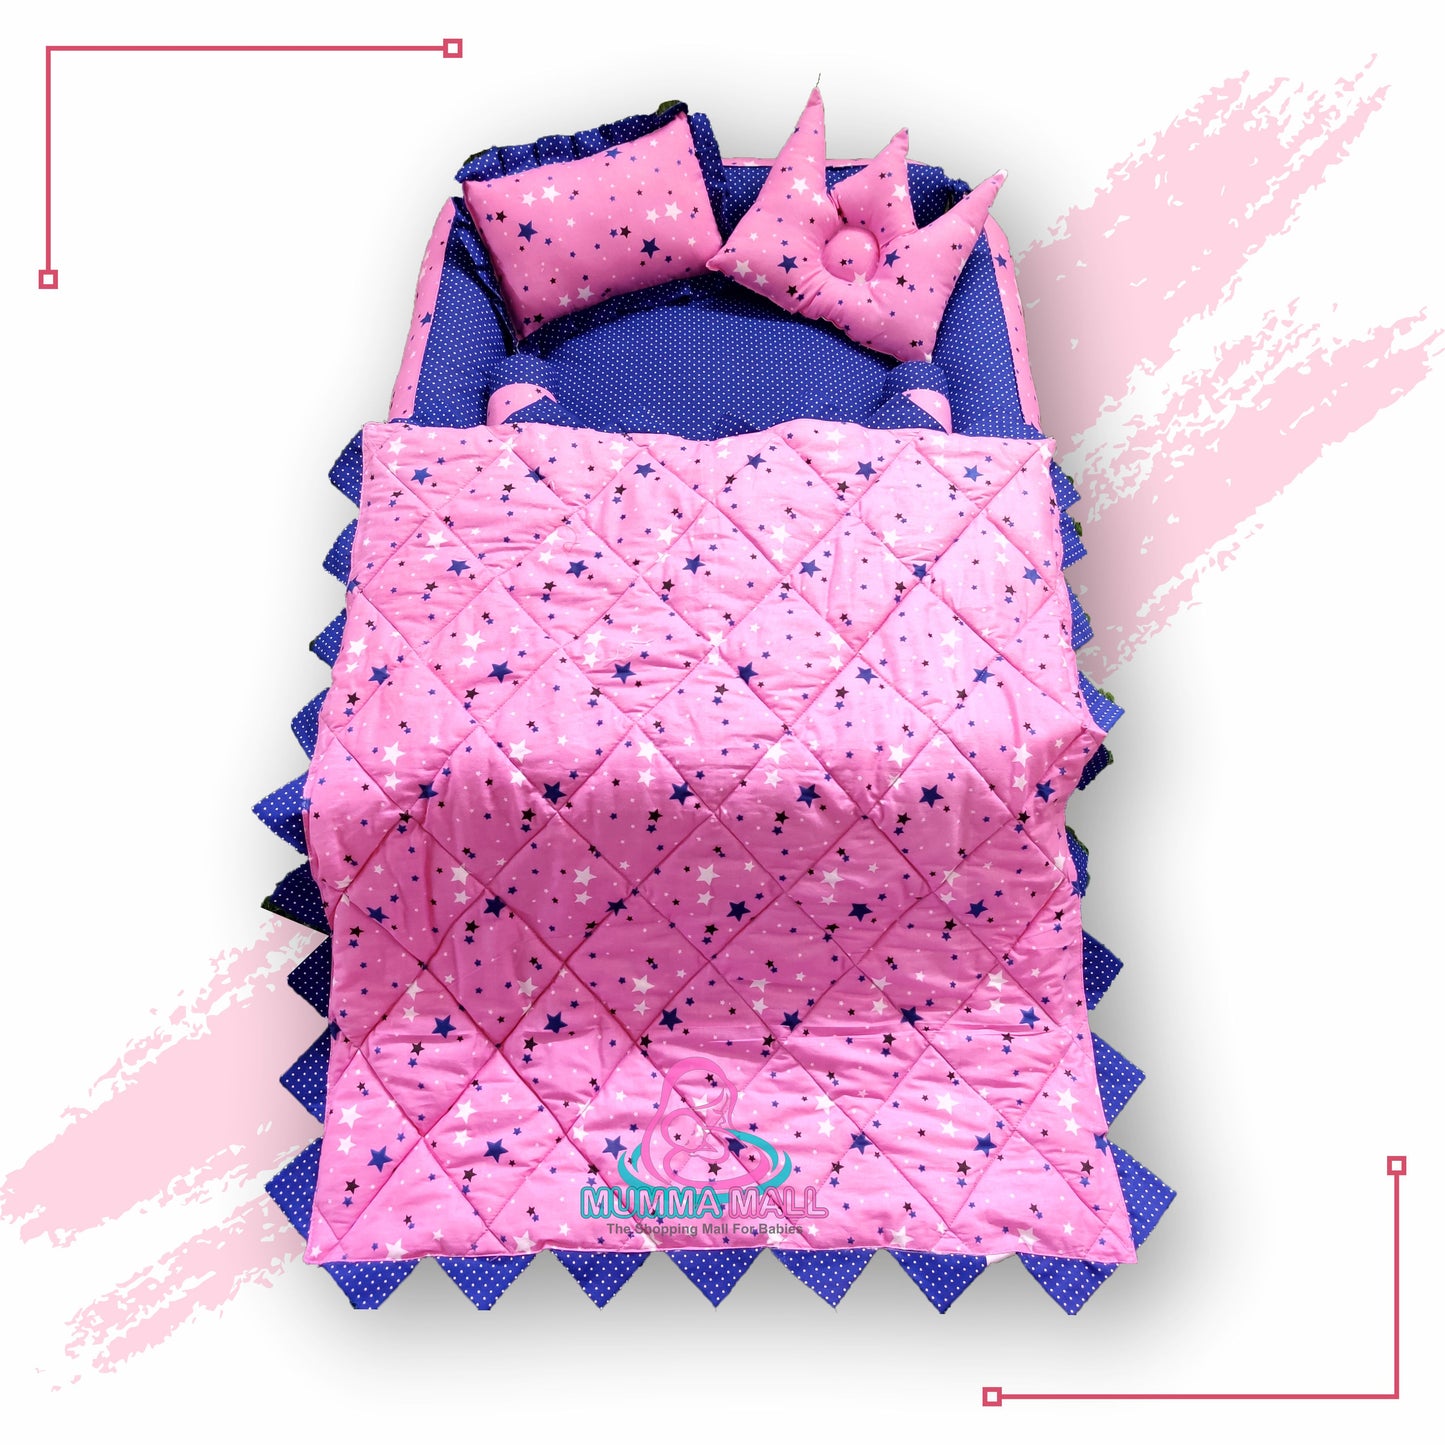 Baby box mattress with blanket and set of 4 pillows as neck support, side support and toy (Pink and Blue)